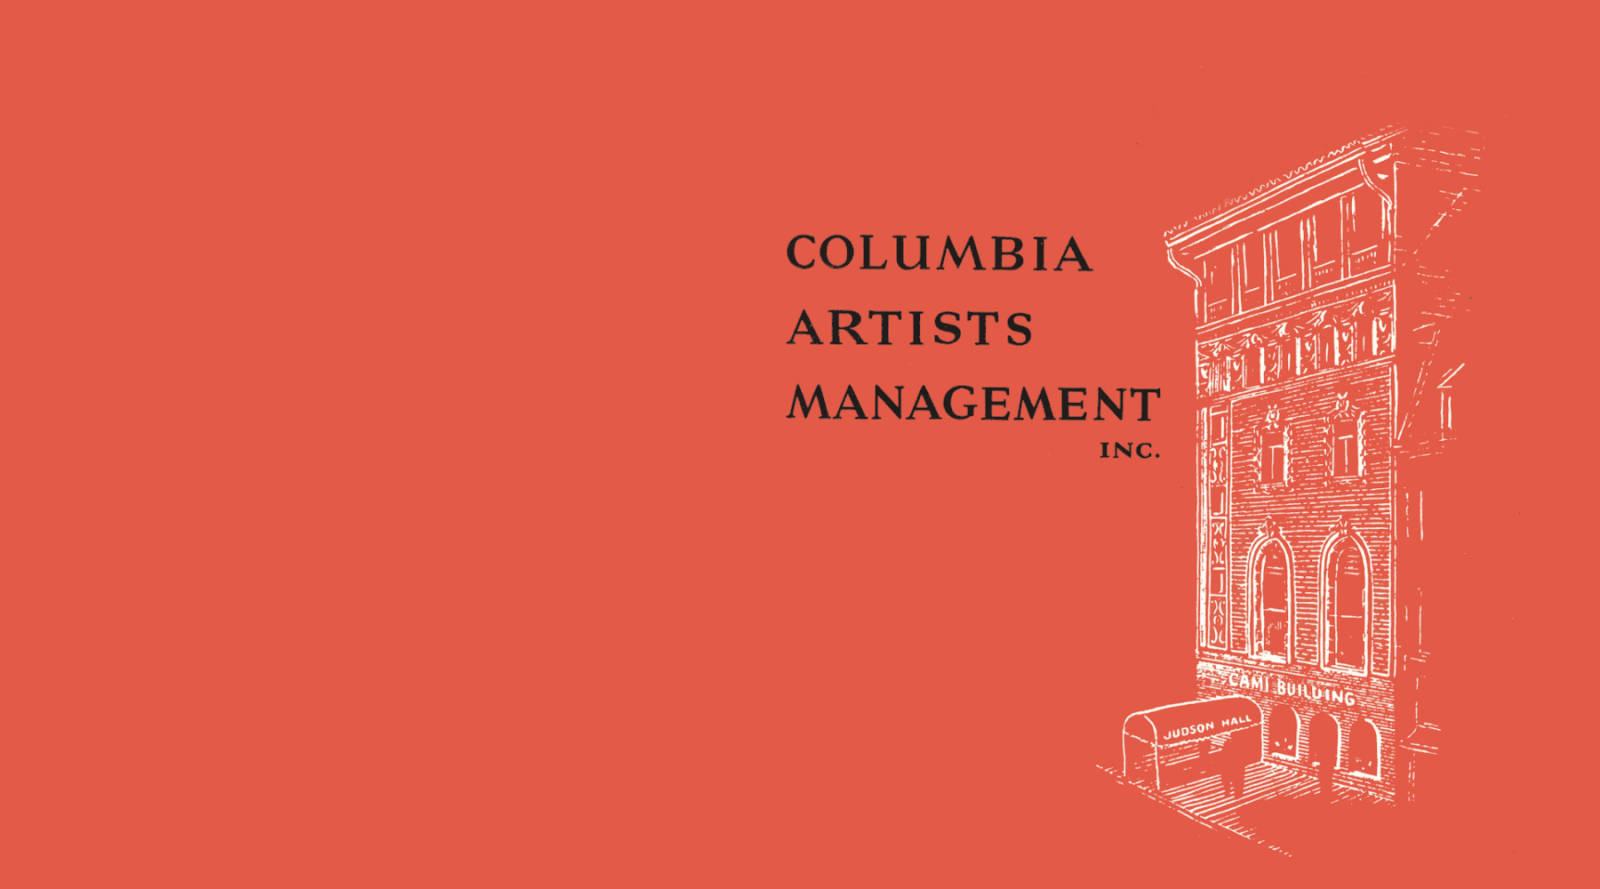 About Columbia Artists